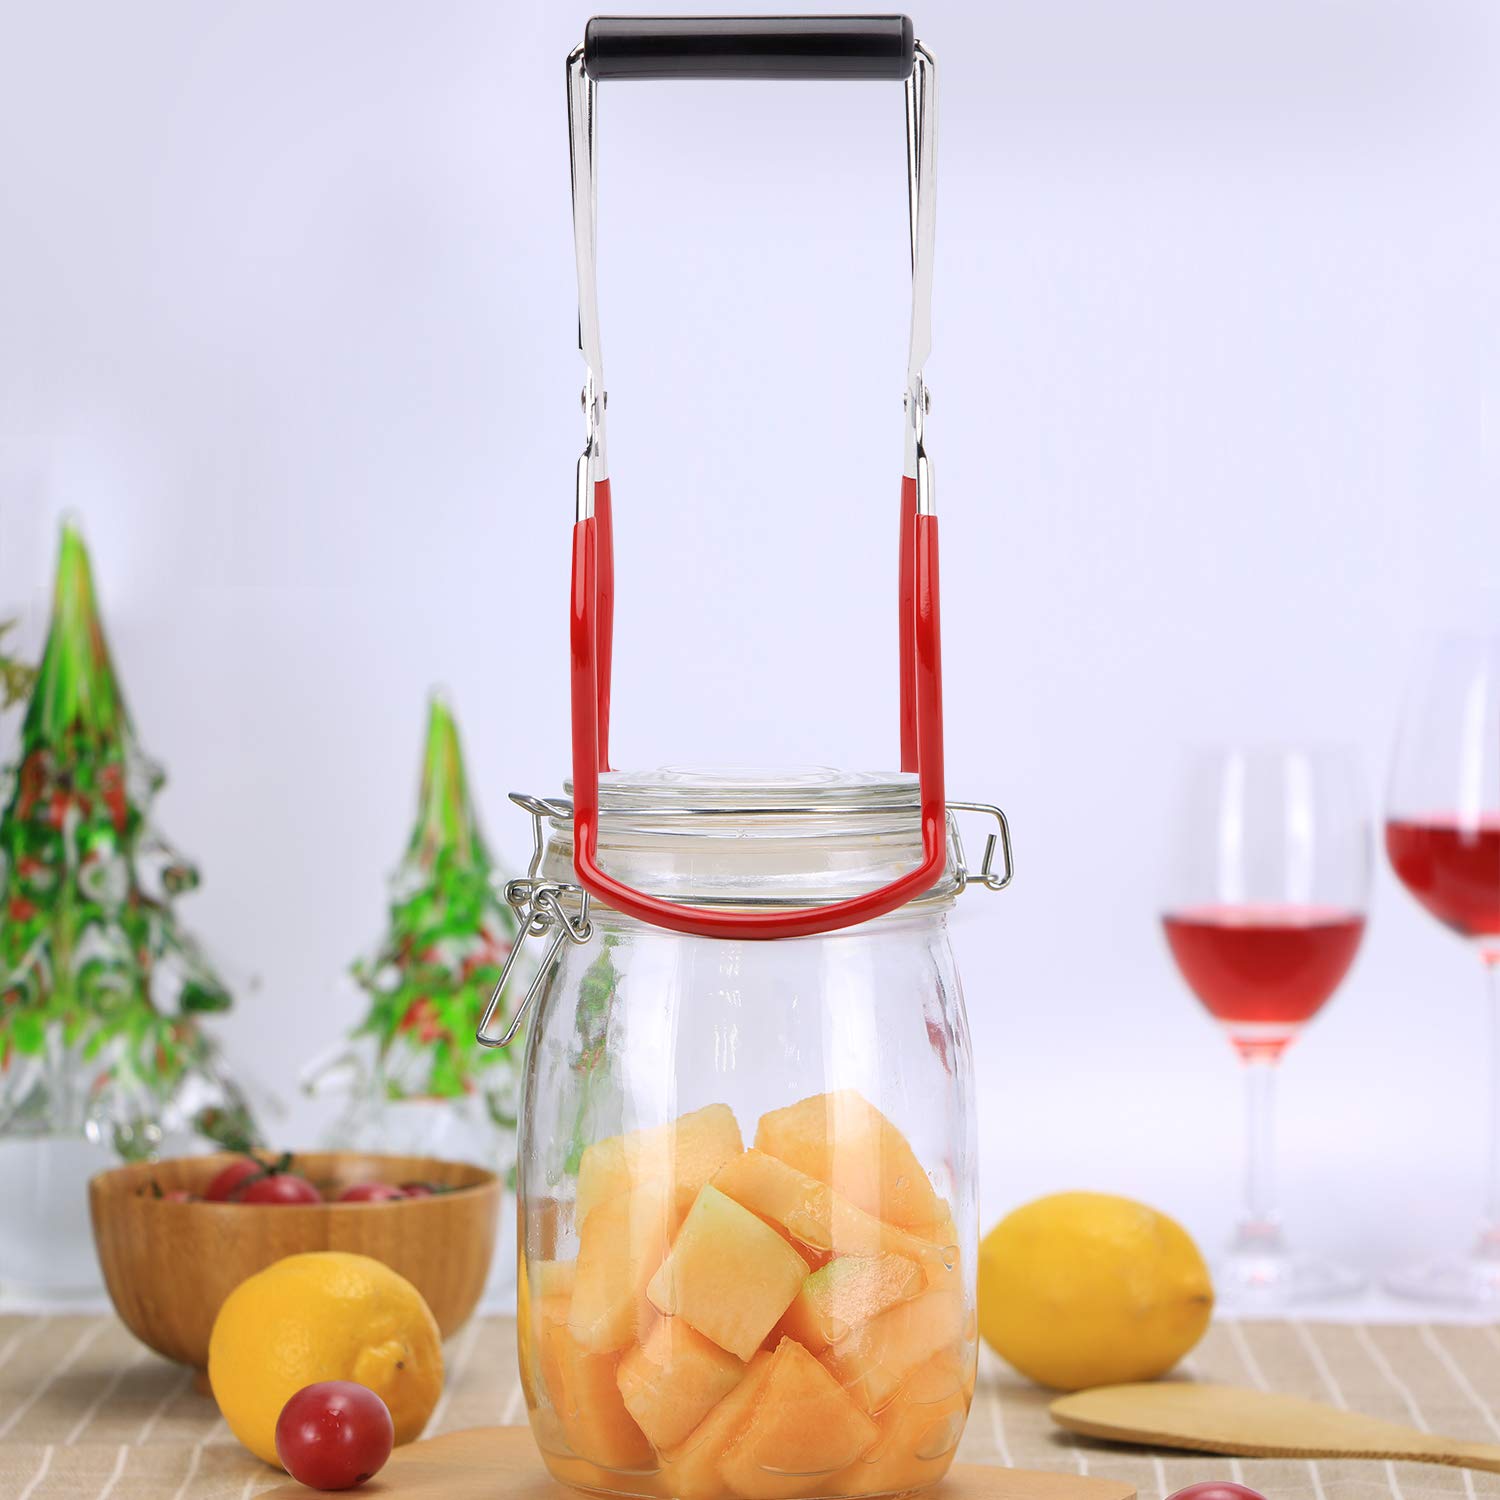 Eeoyu Canning Jar Lifter Tongs Stainless Steel Jar Lifter with Grip Handle for Home Kitchen (Red)